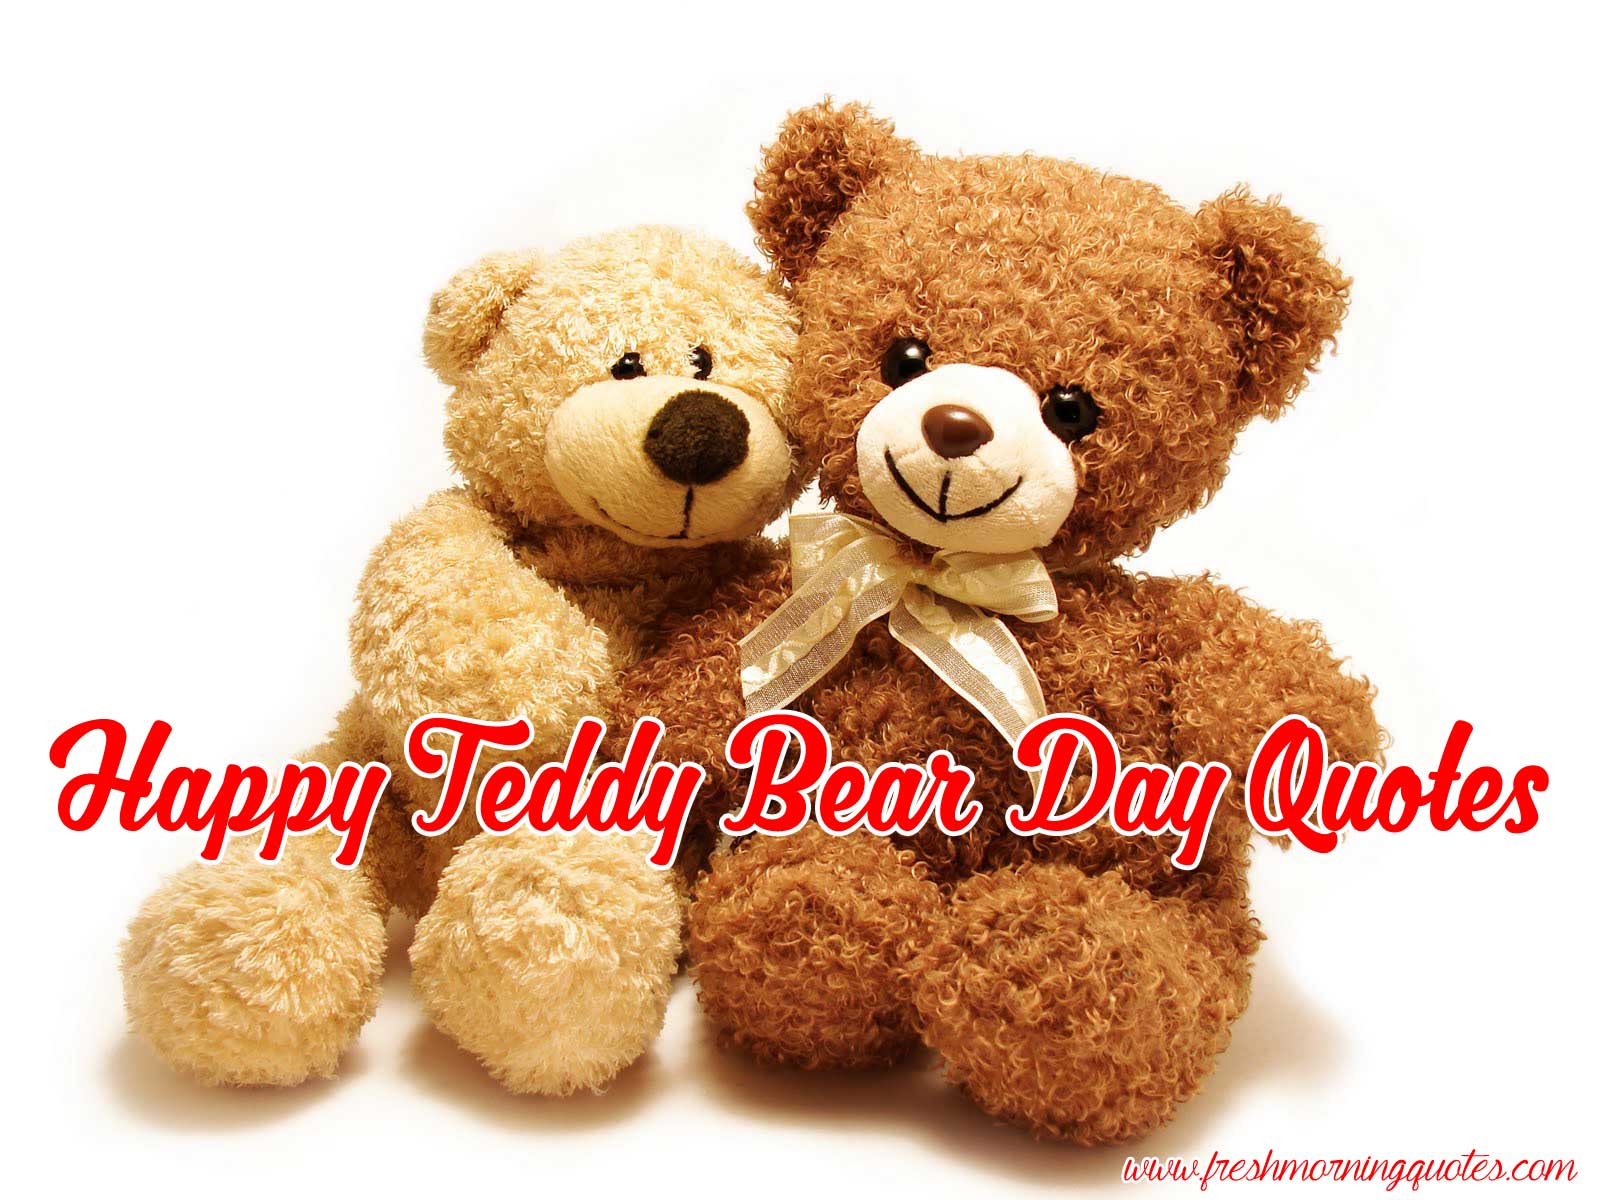 Teddy Bear Day 2023 Quotes Sayings and Images - Freshmorningquotes